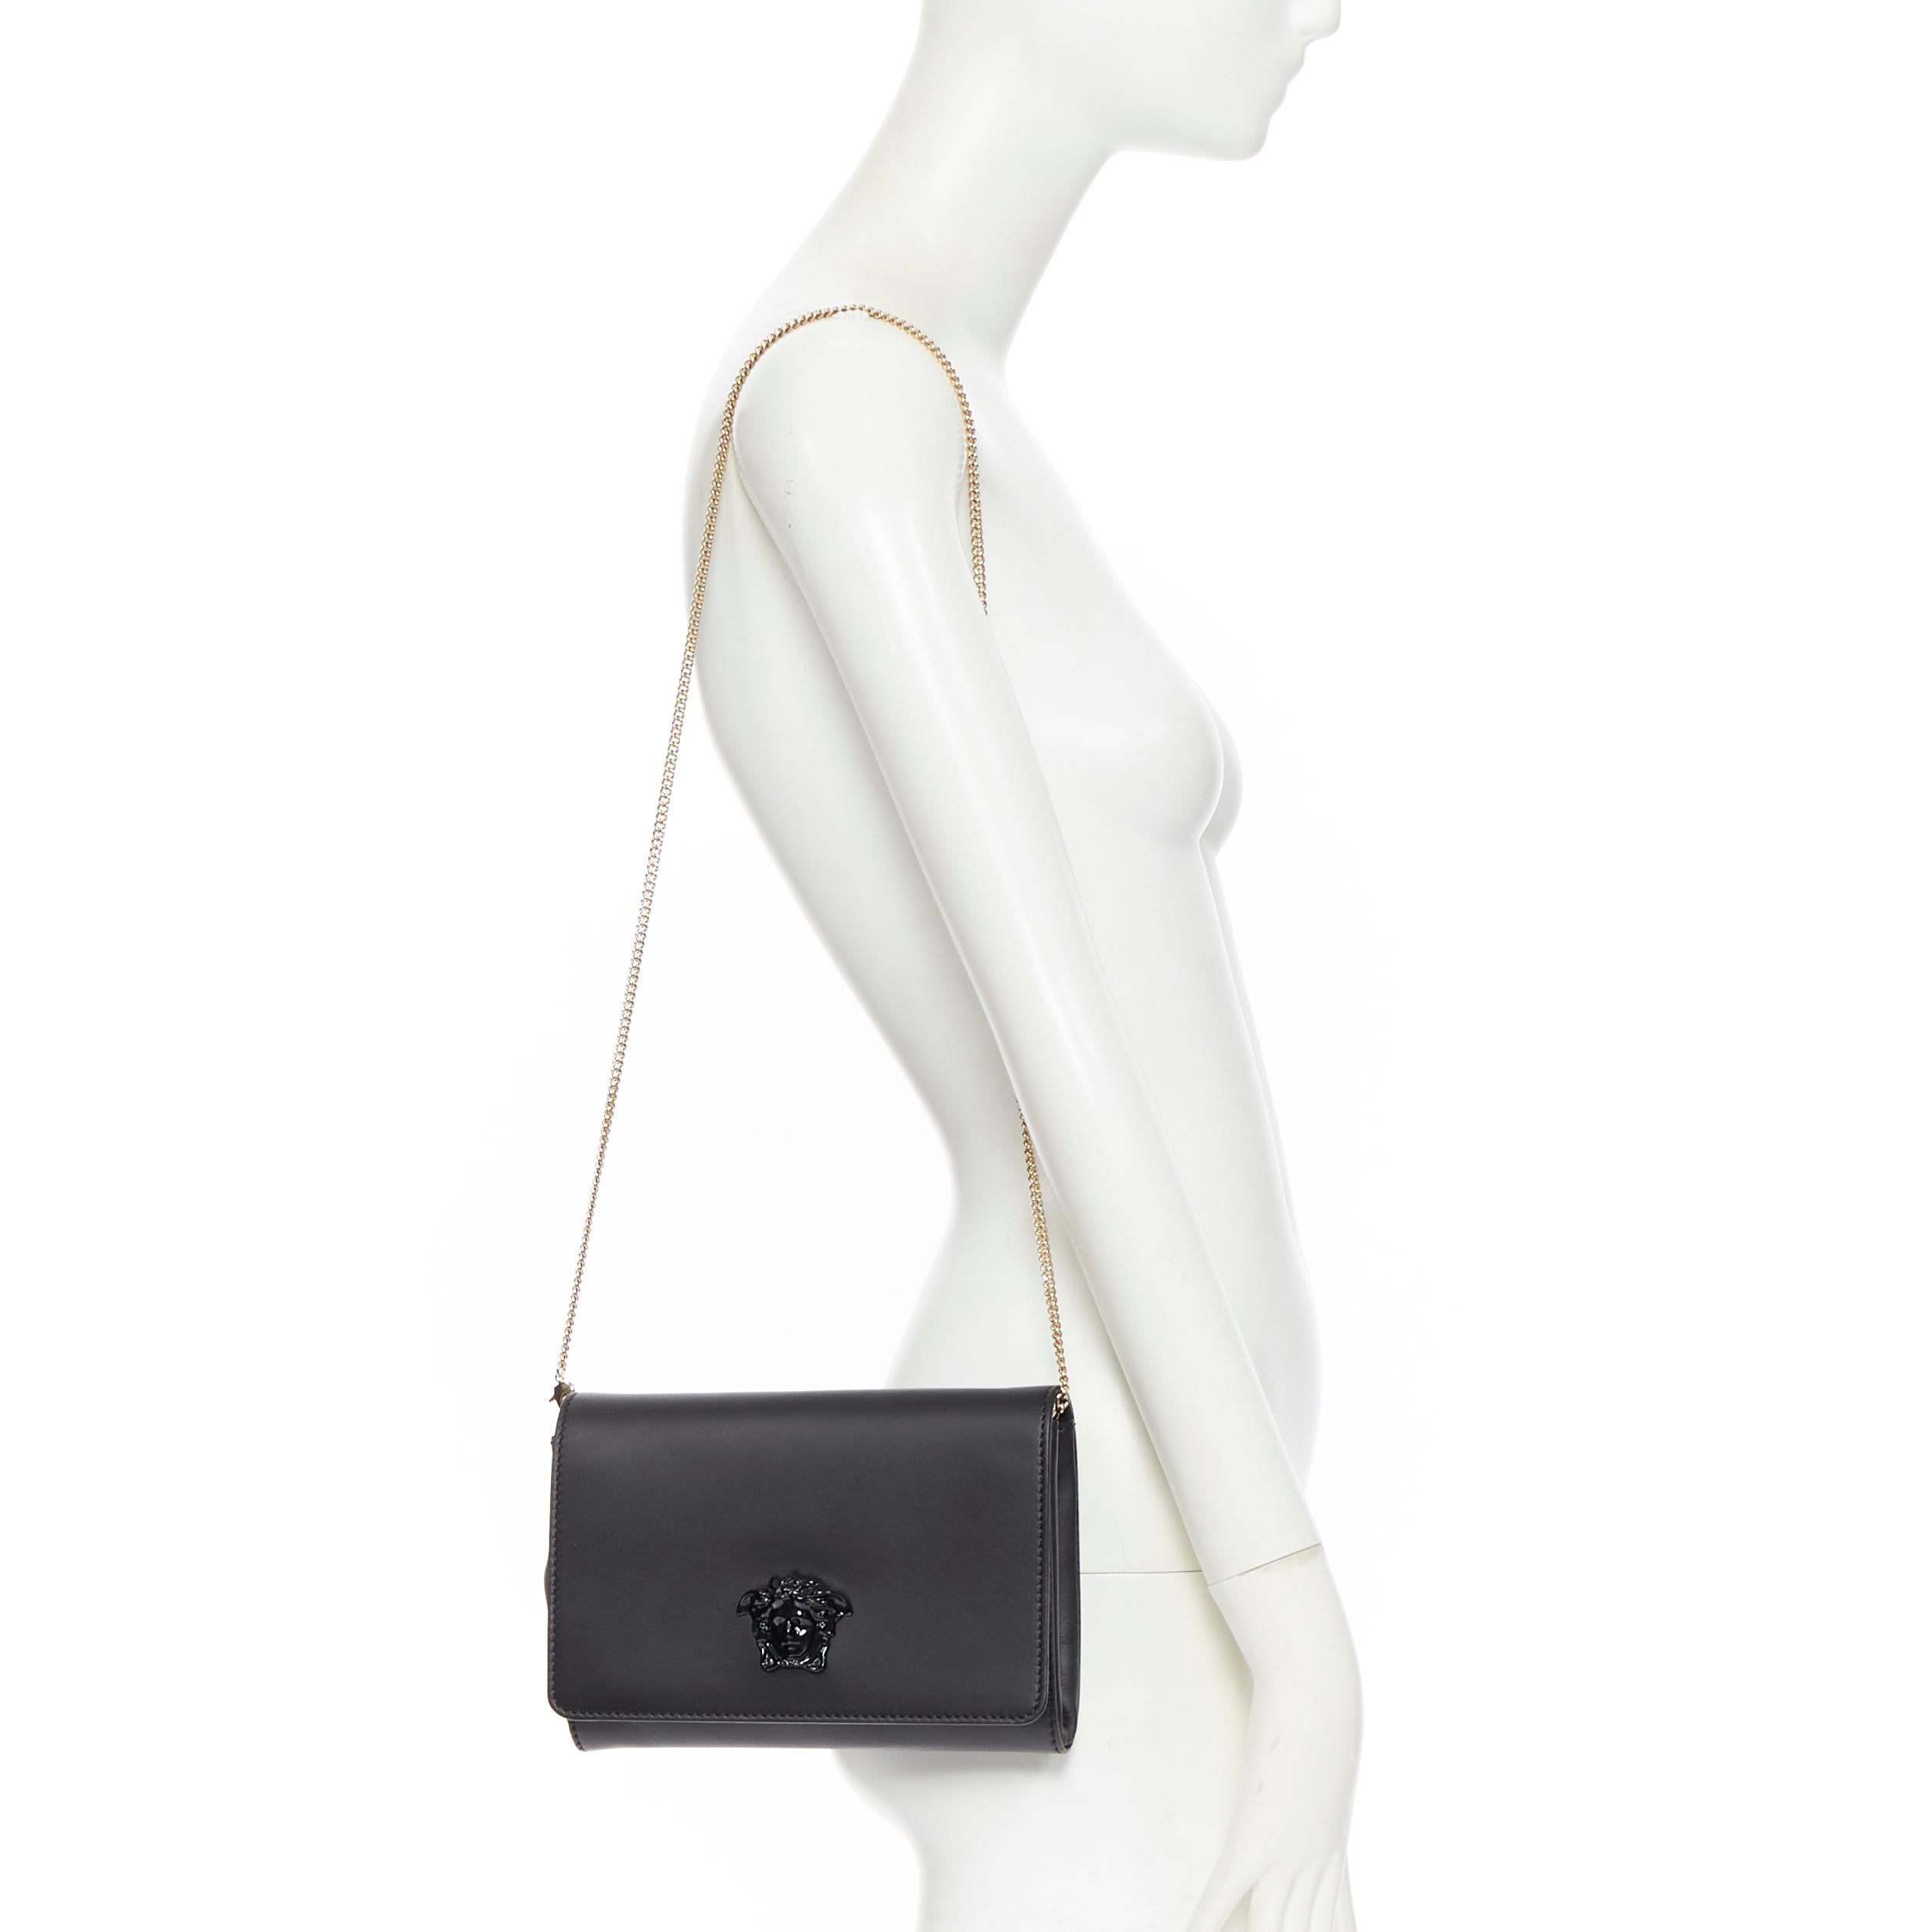 new VERSACE Palazzo Medusa black calf leather flap shoulder chain clutch bag
Brand: Versace
Designer: Donatella Versace
Model Name / Style: Palazzo Medusa flap
Material: Leather
Color: Black
Pattern: Solid
Closure: Magnetic
Extra Detail: Signature